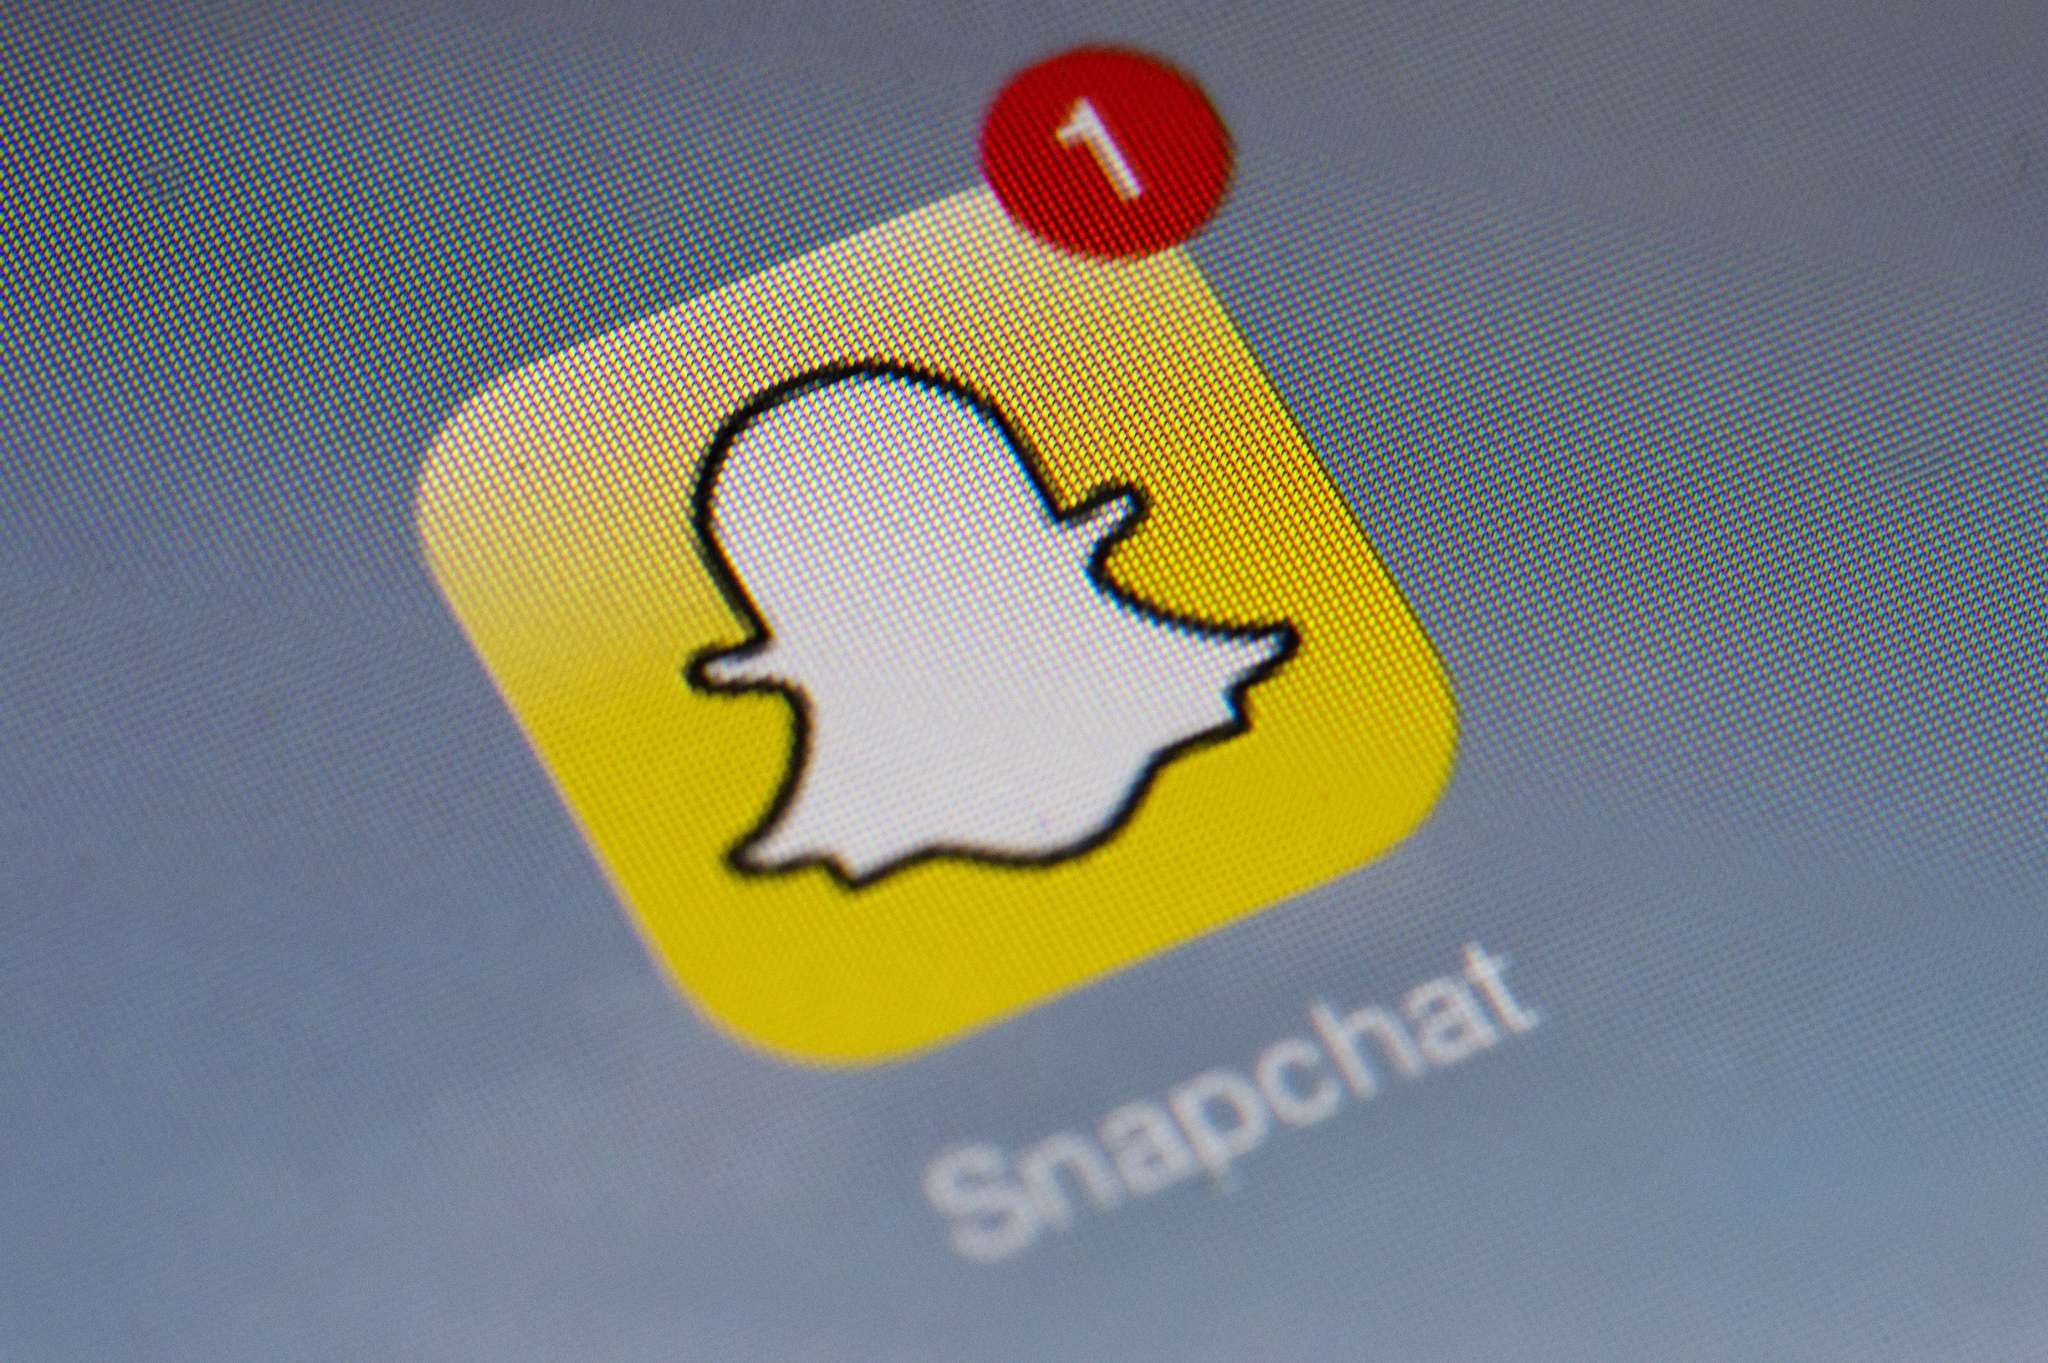 An application security expert says it scrutinises Snapchat's claim that its servers 'were never breached'